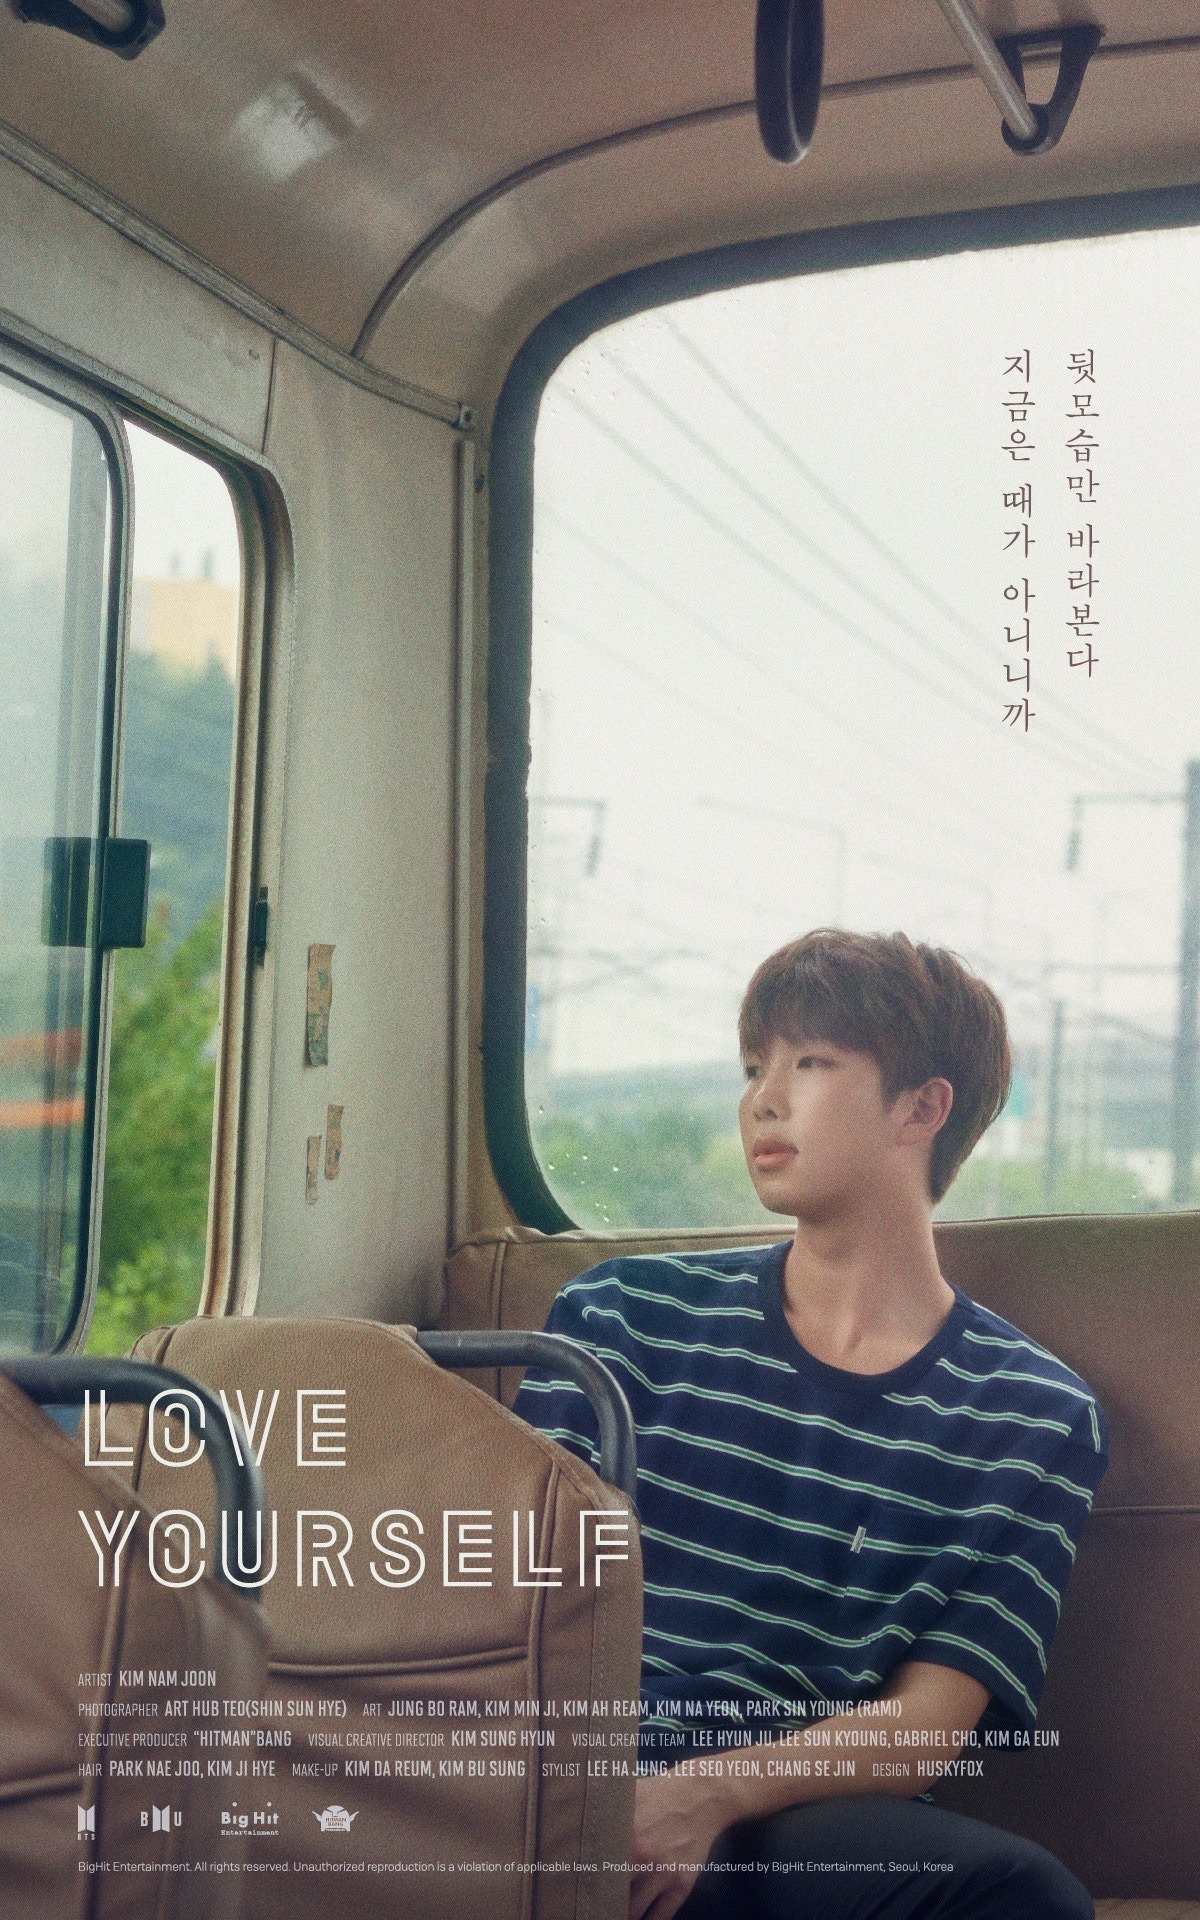 Here Is Everything You Need To Know About Bts “love Yourself” Posters Koreaboo 8177